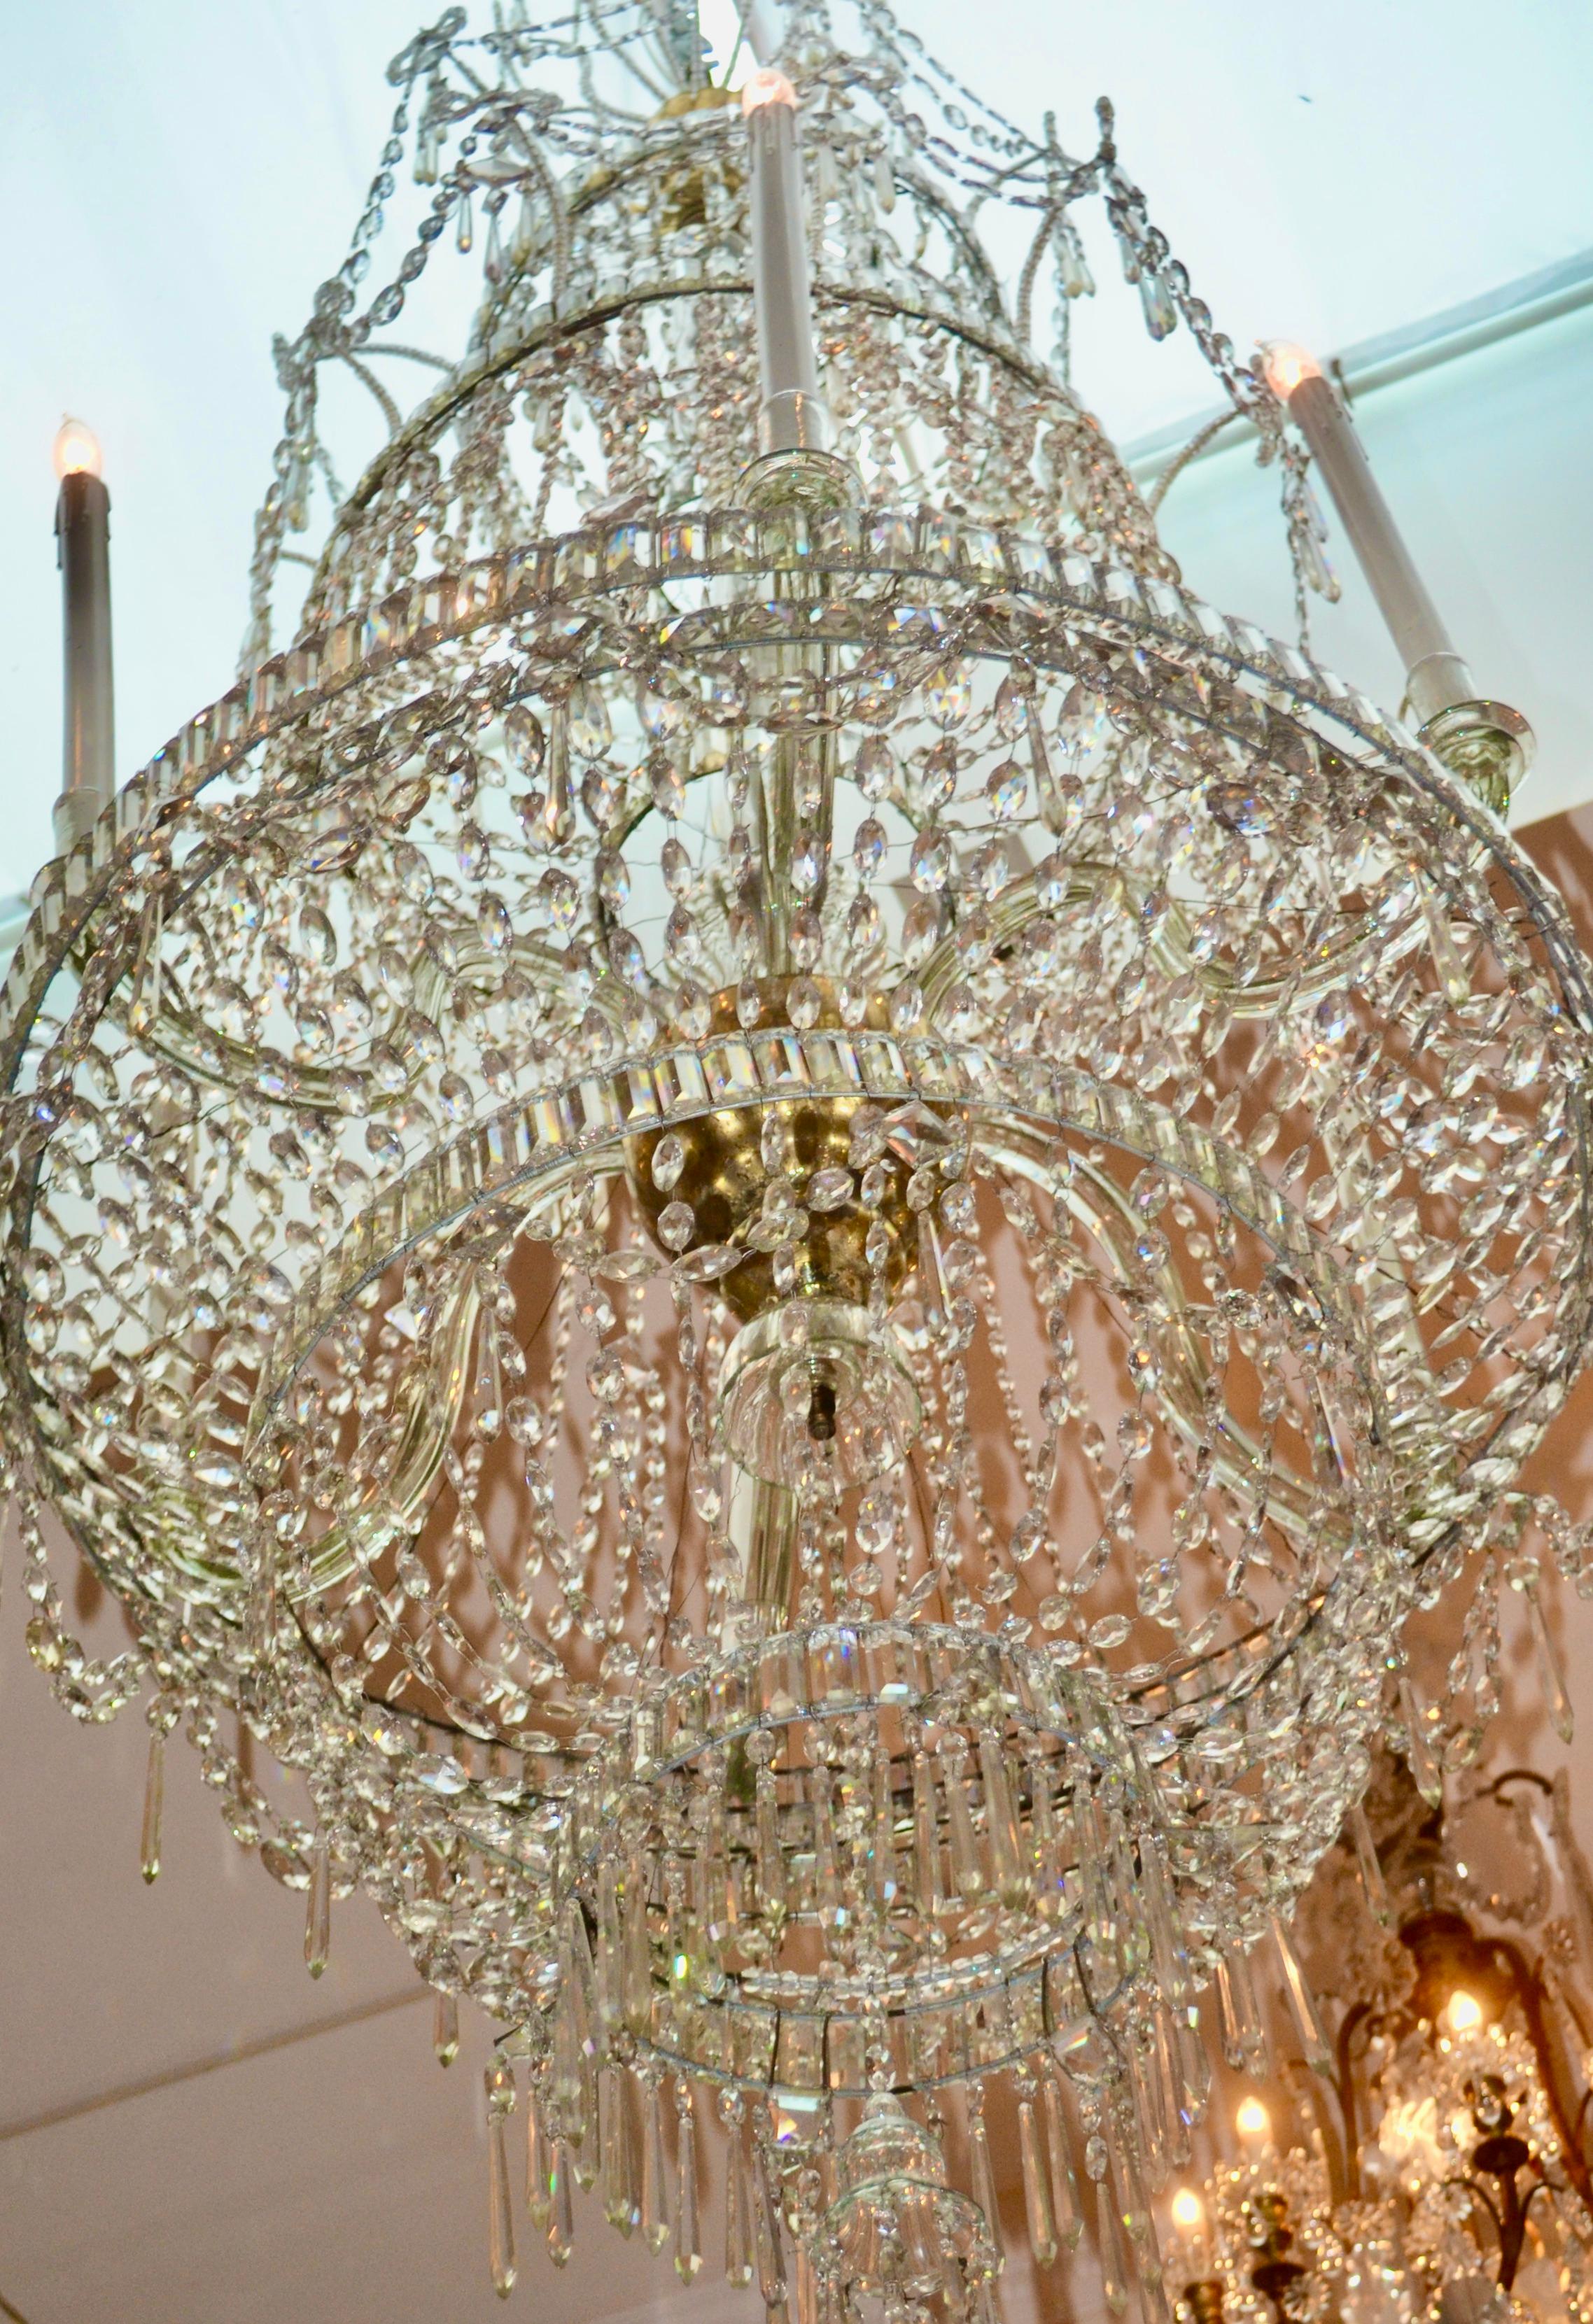 Neoclassical 18th Century Crystal Chandelier from the Royal Crystal Manufacturer La Granja For Sale